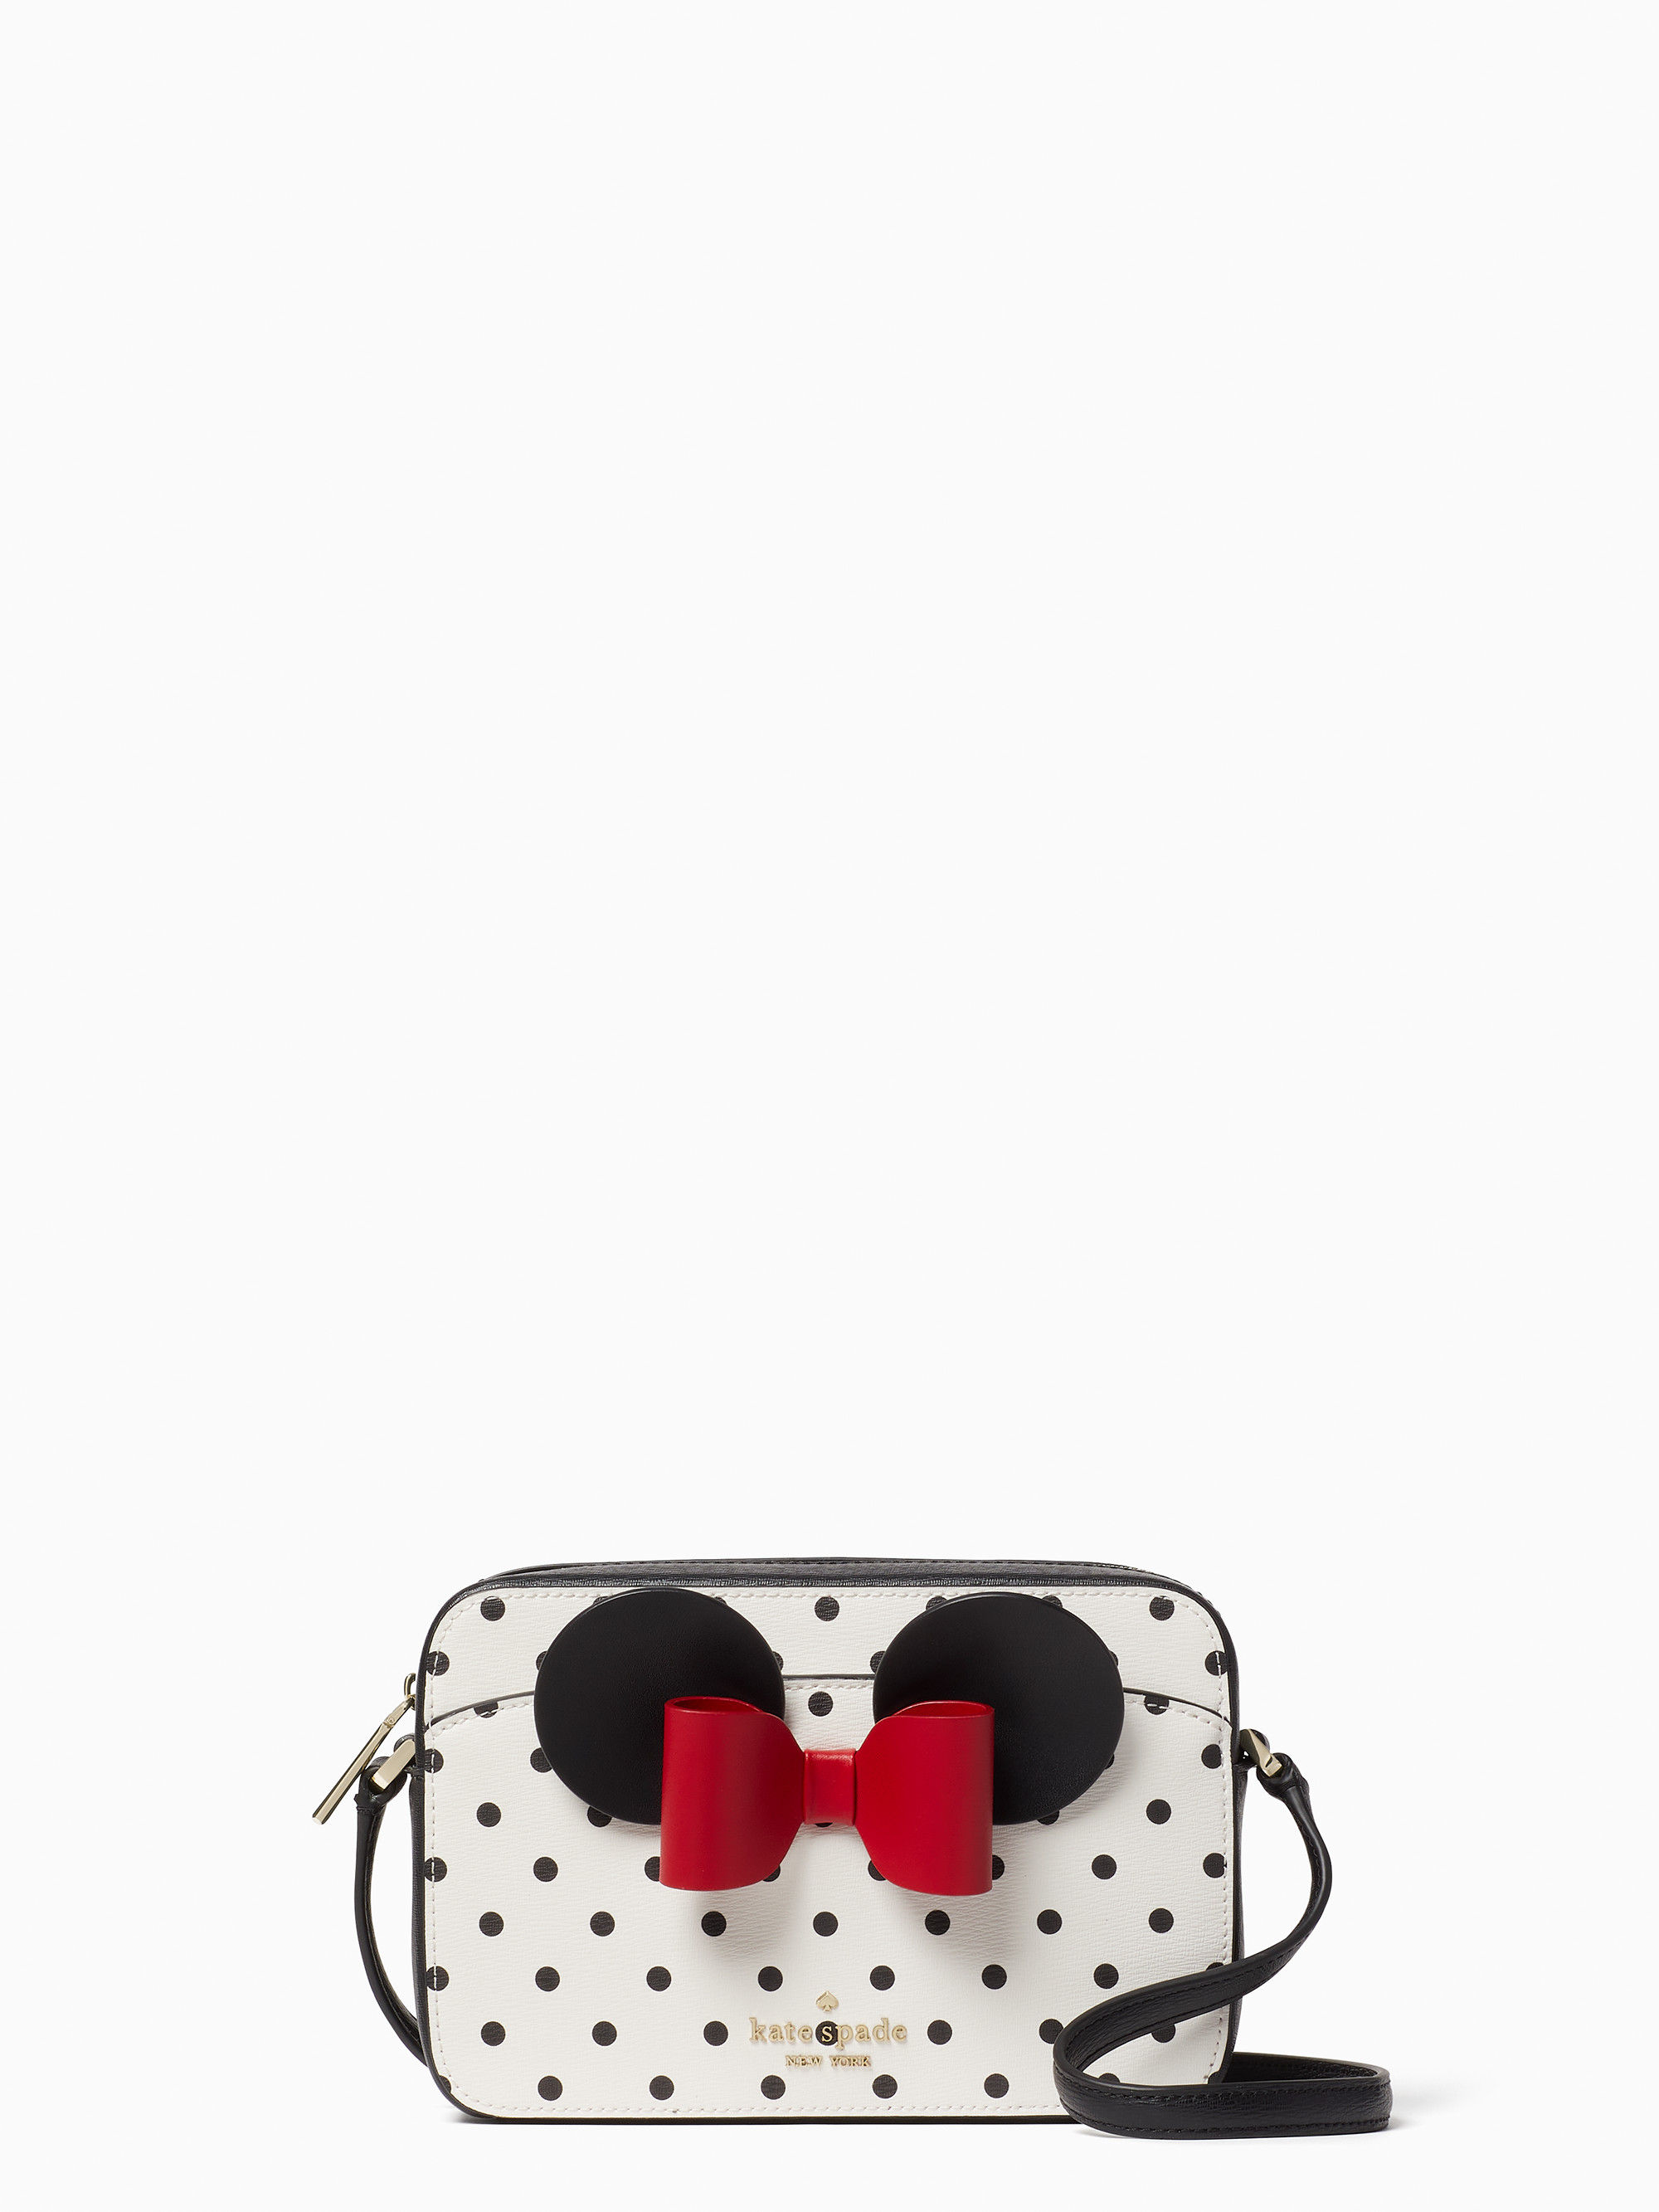 Disney x Kate Spade New York Other Minnie Mouse Camera Bag